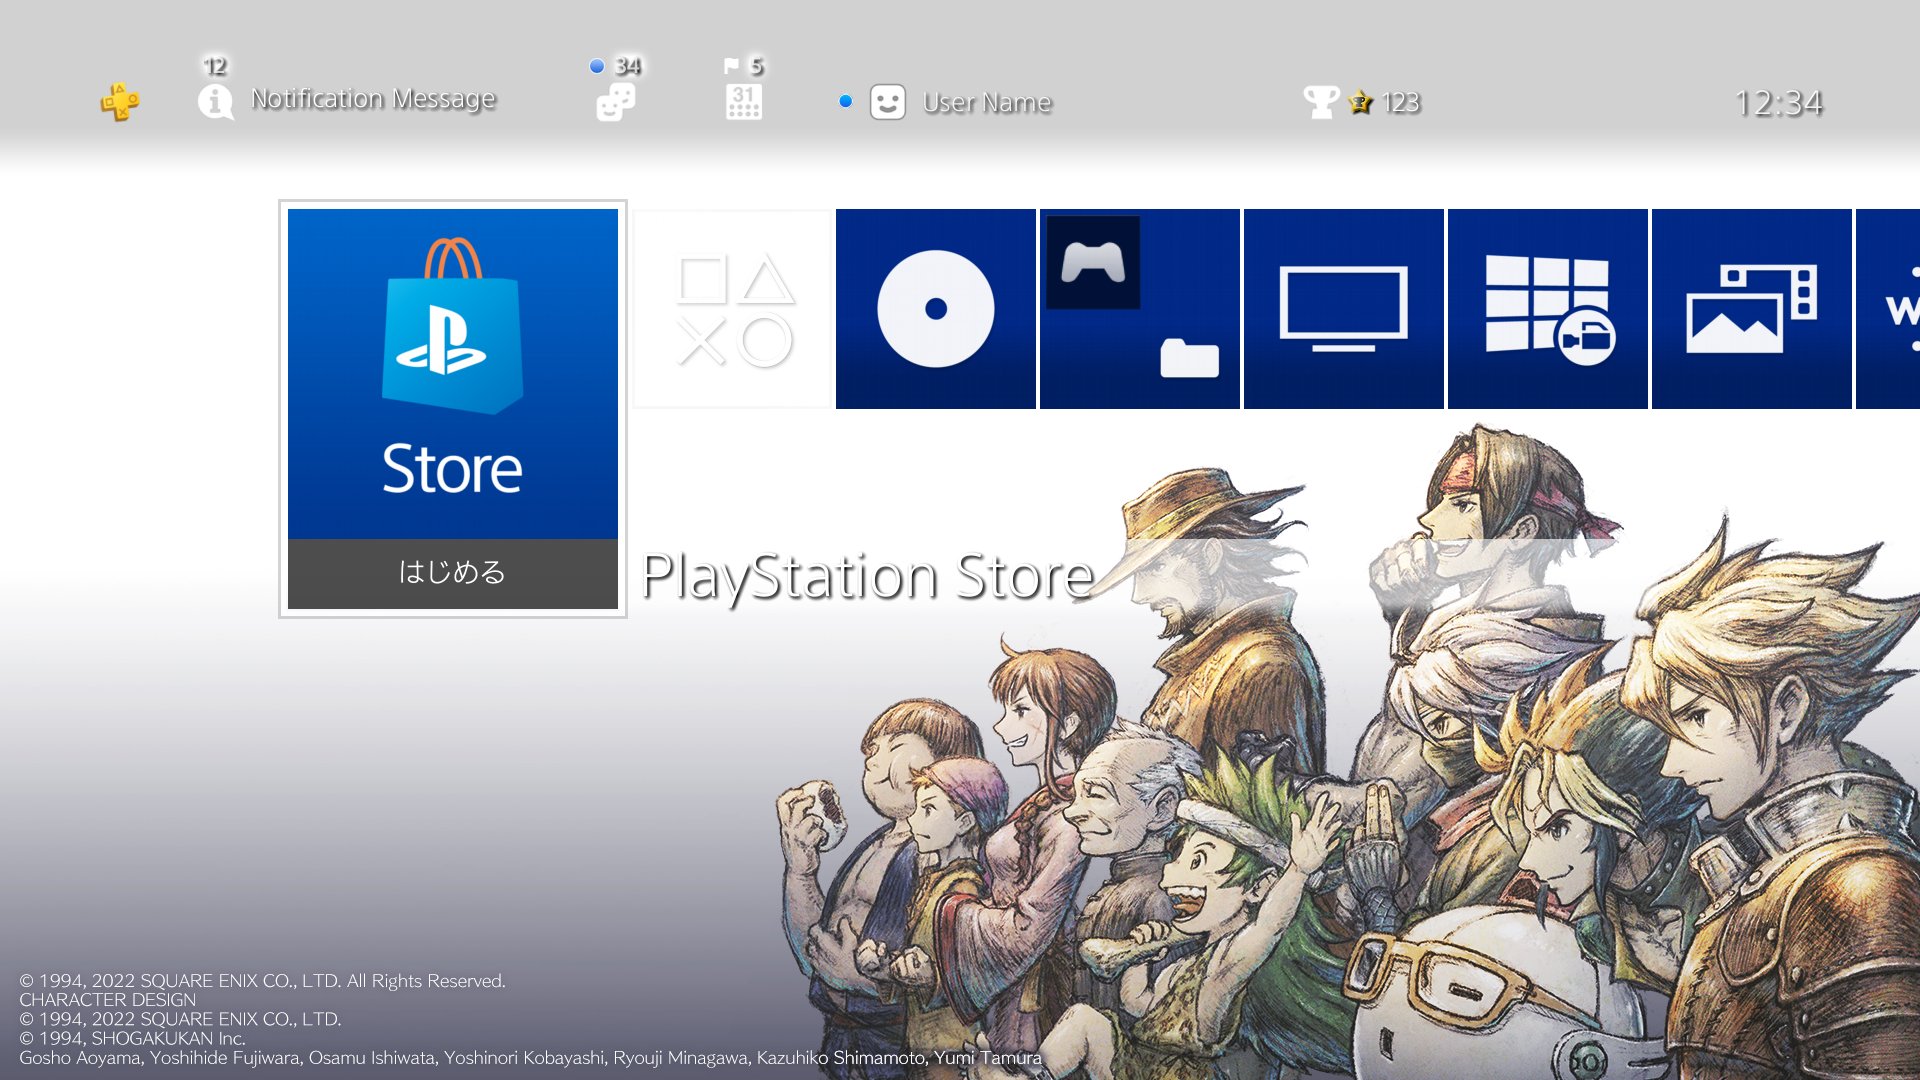 The new PlayStation Store site is live, along with digital PS5